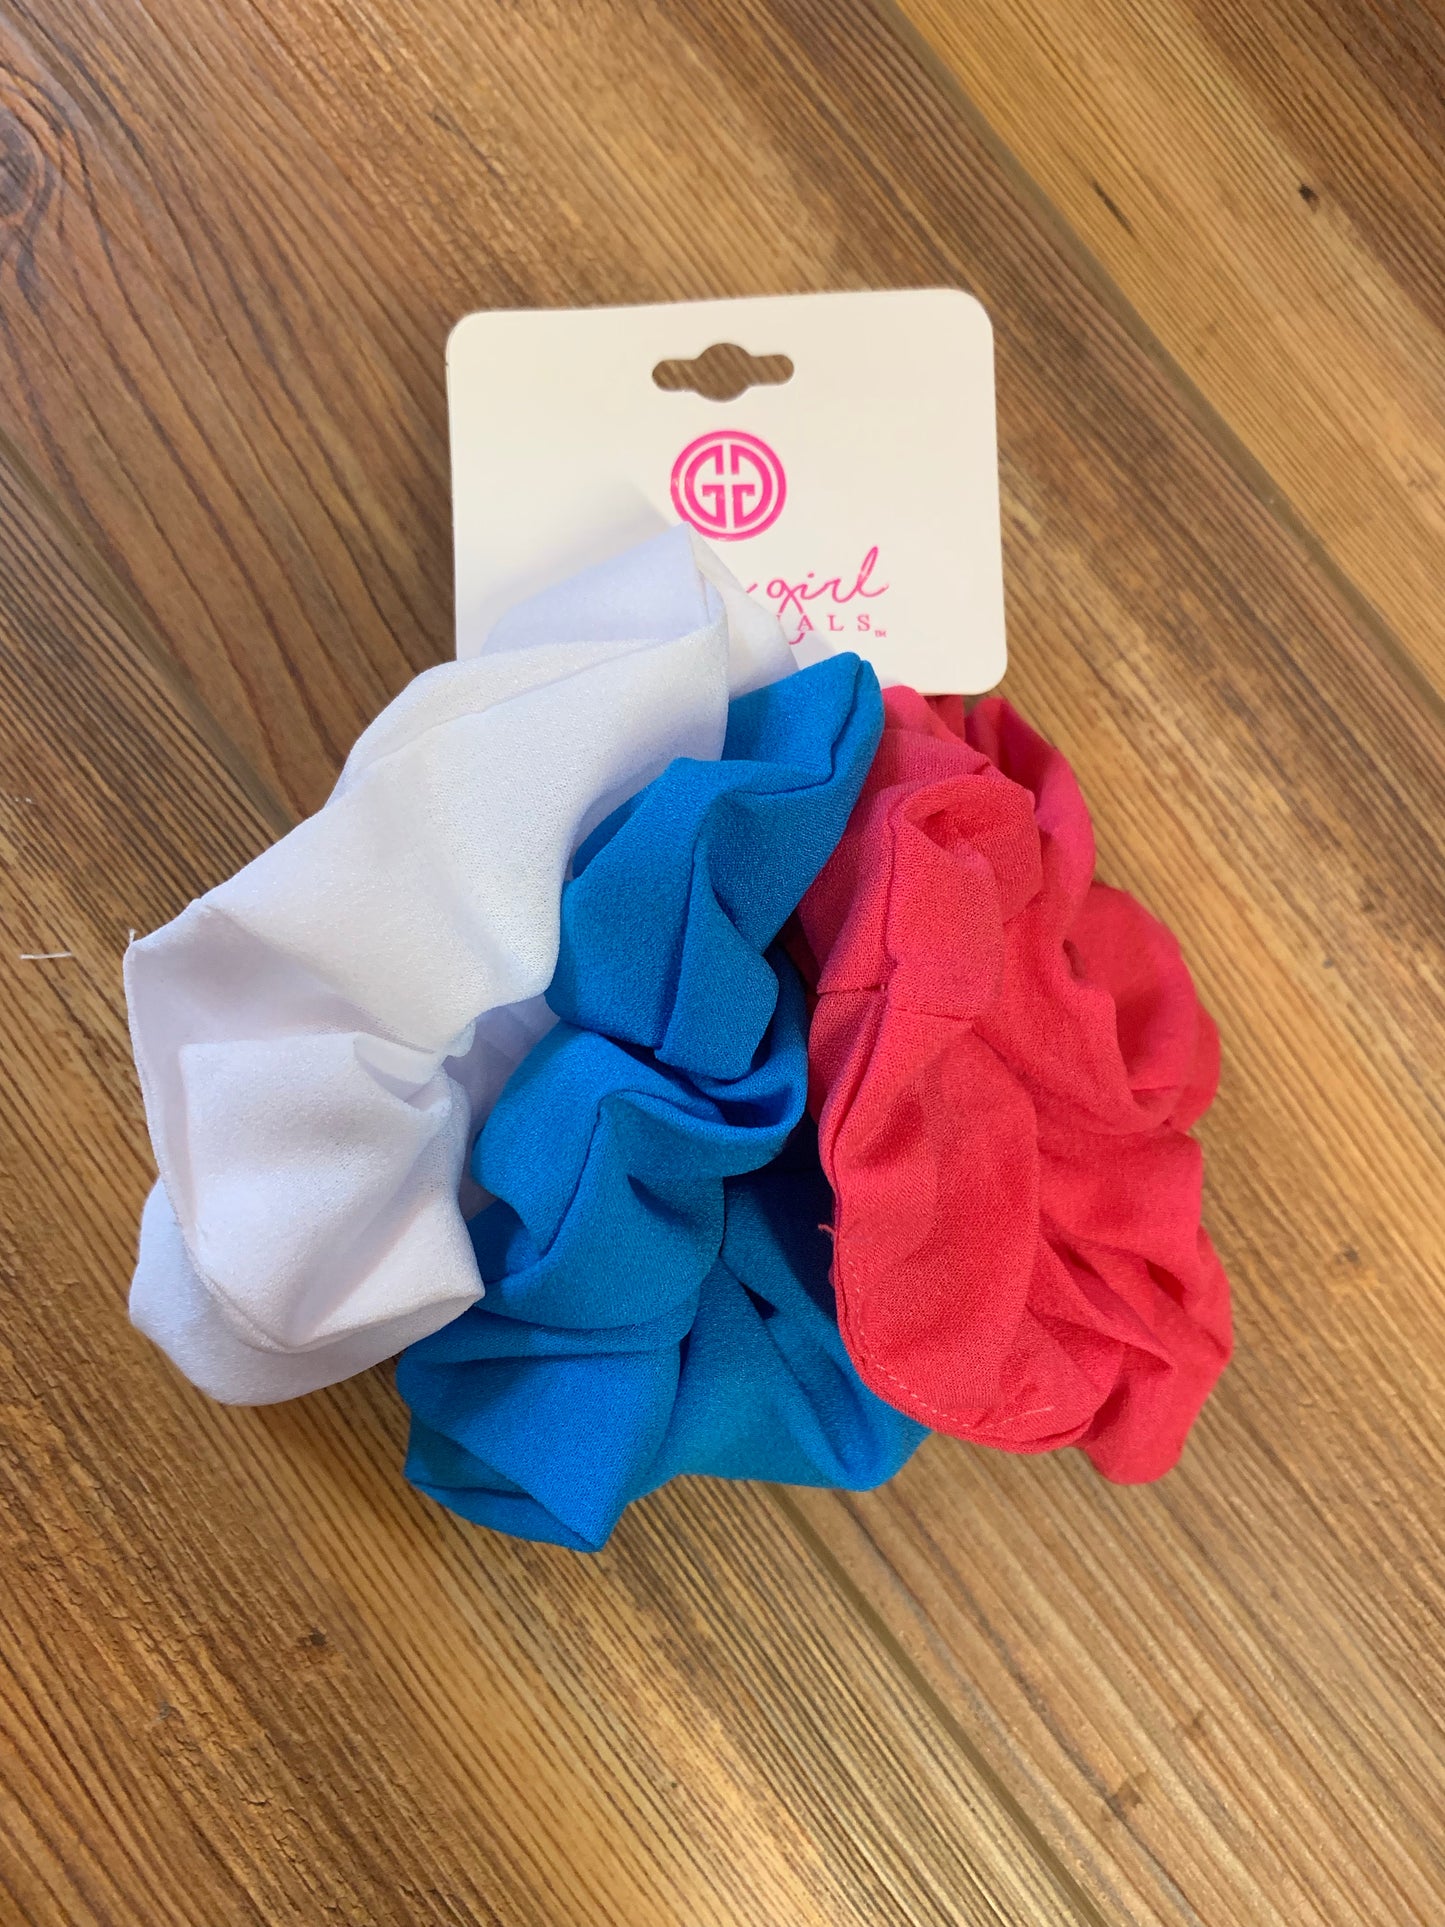 Pack of 3 Assorted Hair Scrunchies - Pink, Blue, White (SCR1)